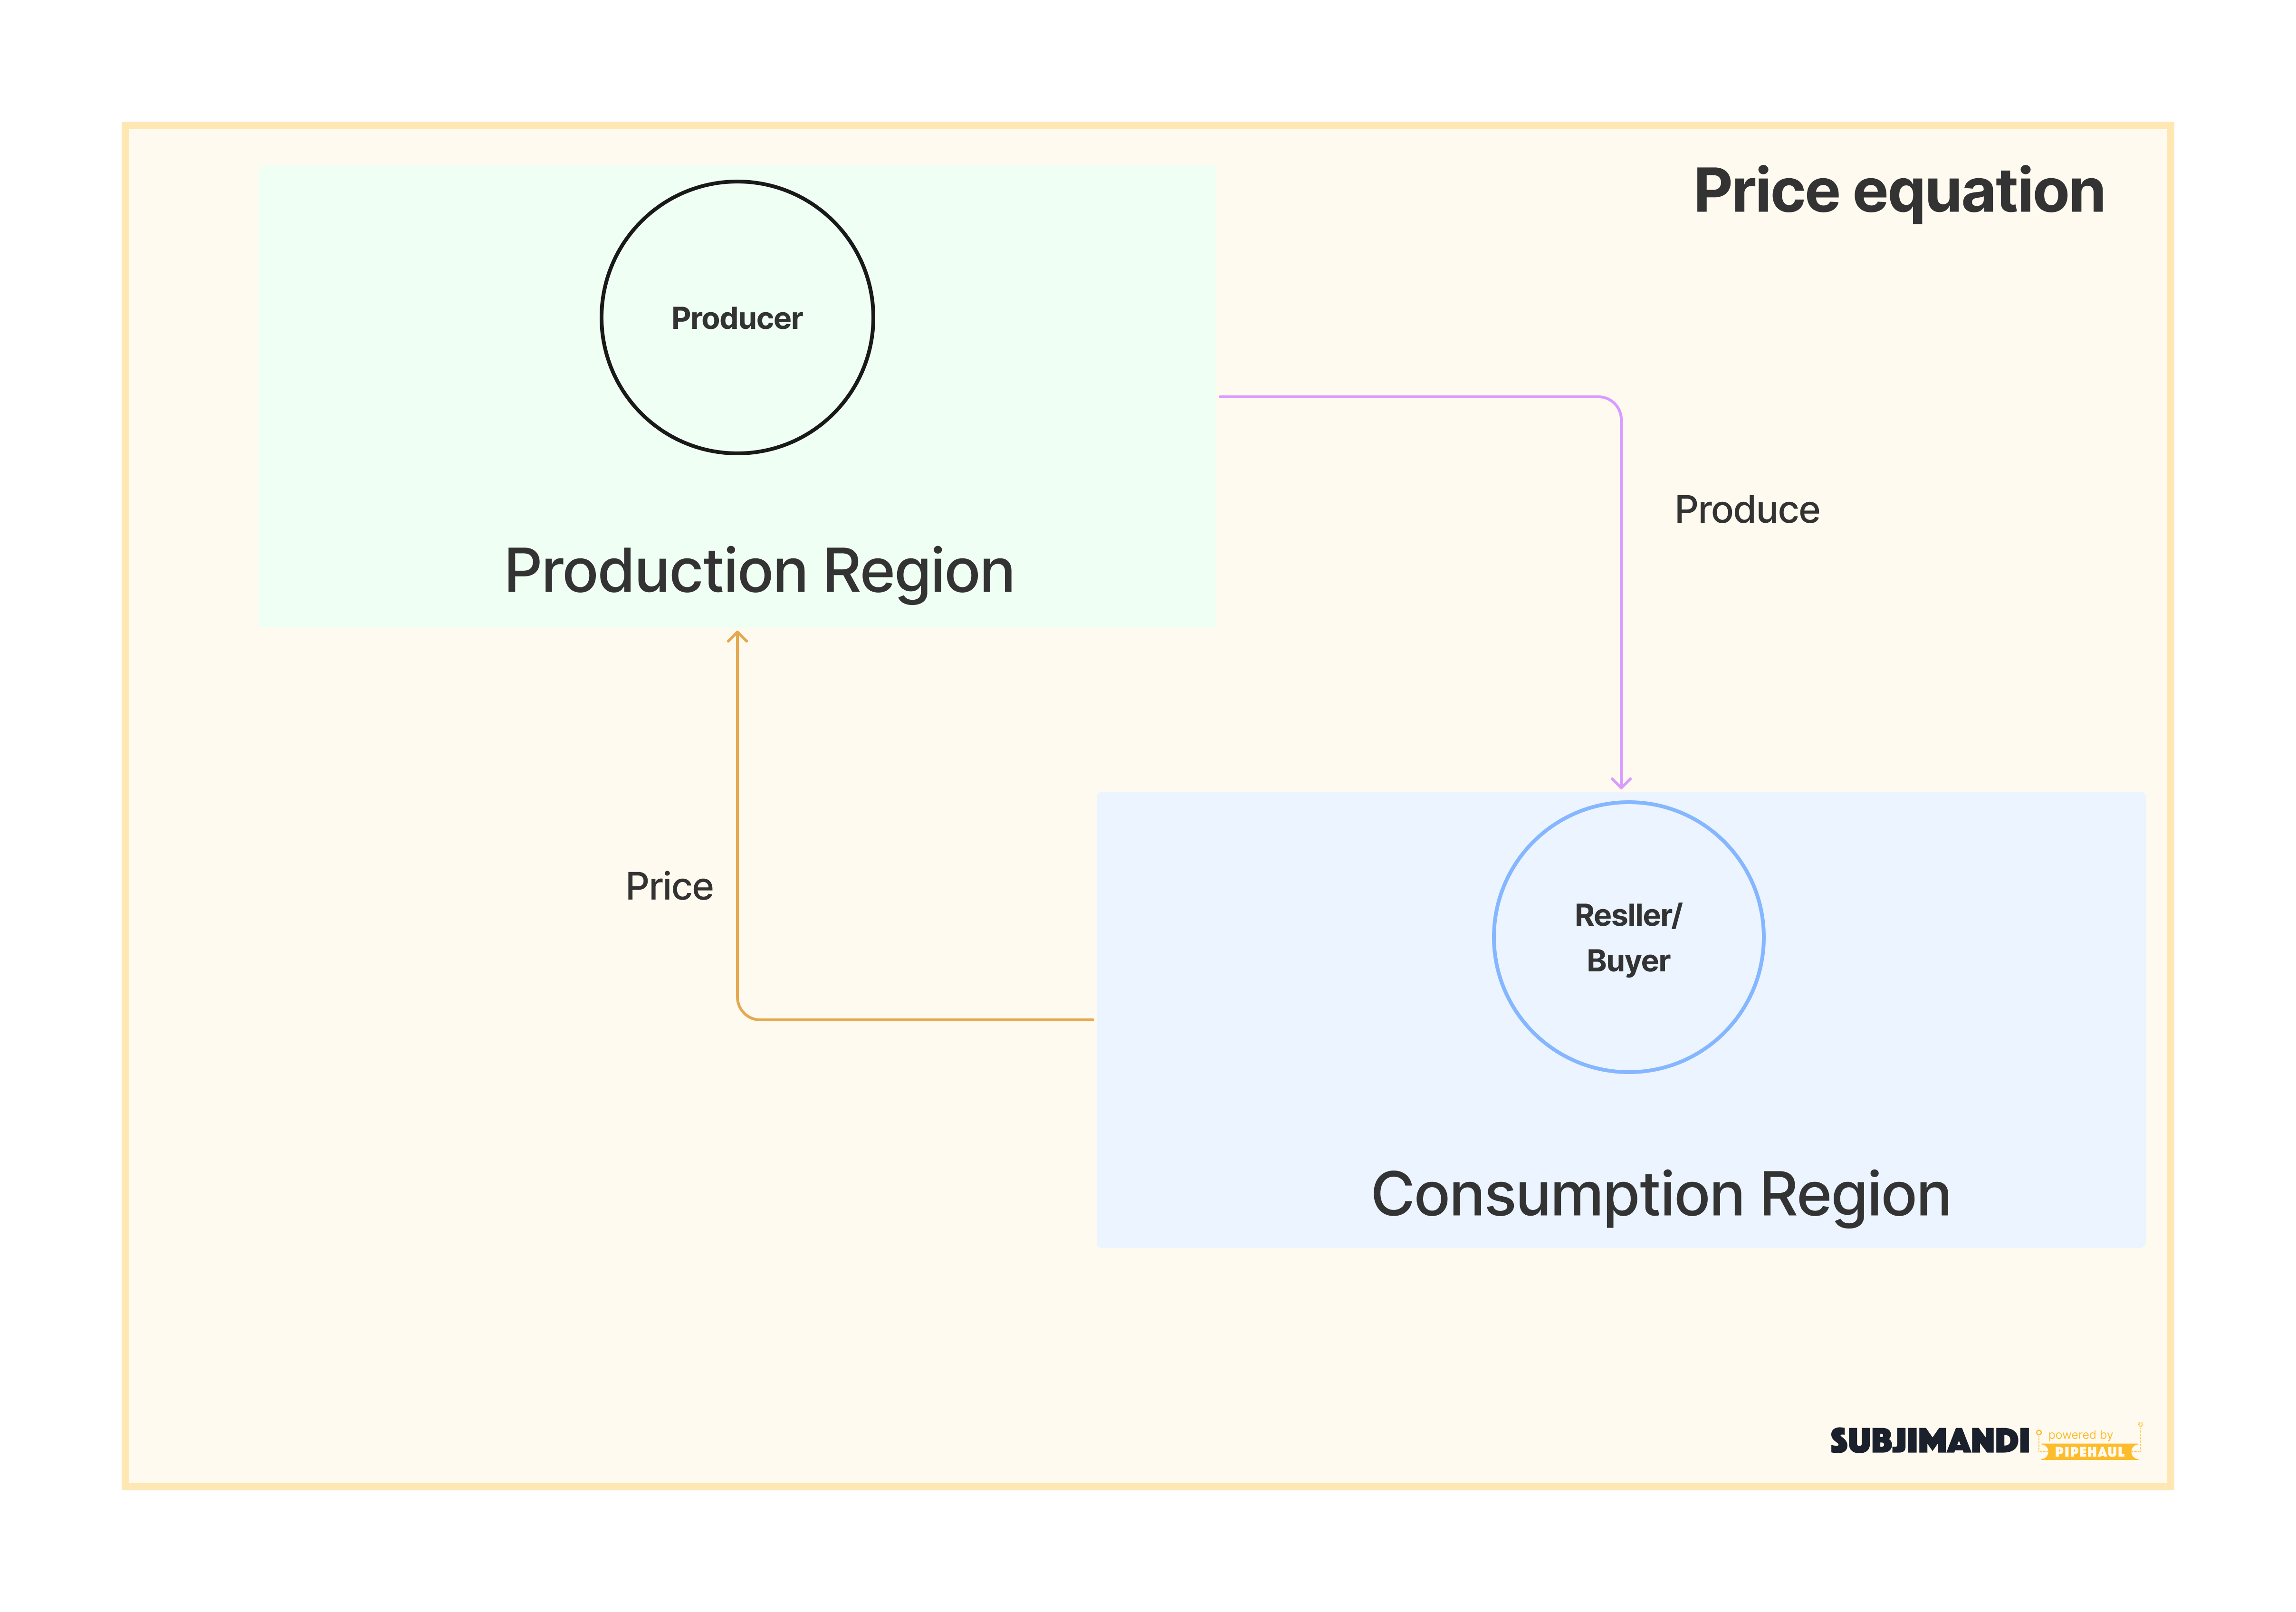 The equation of price and produce equation between production and consumption region. 